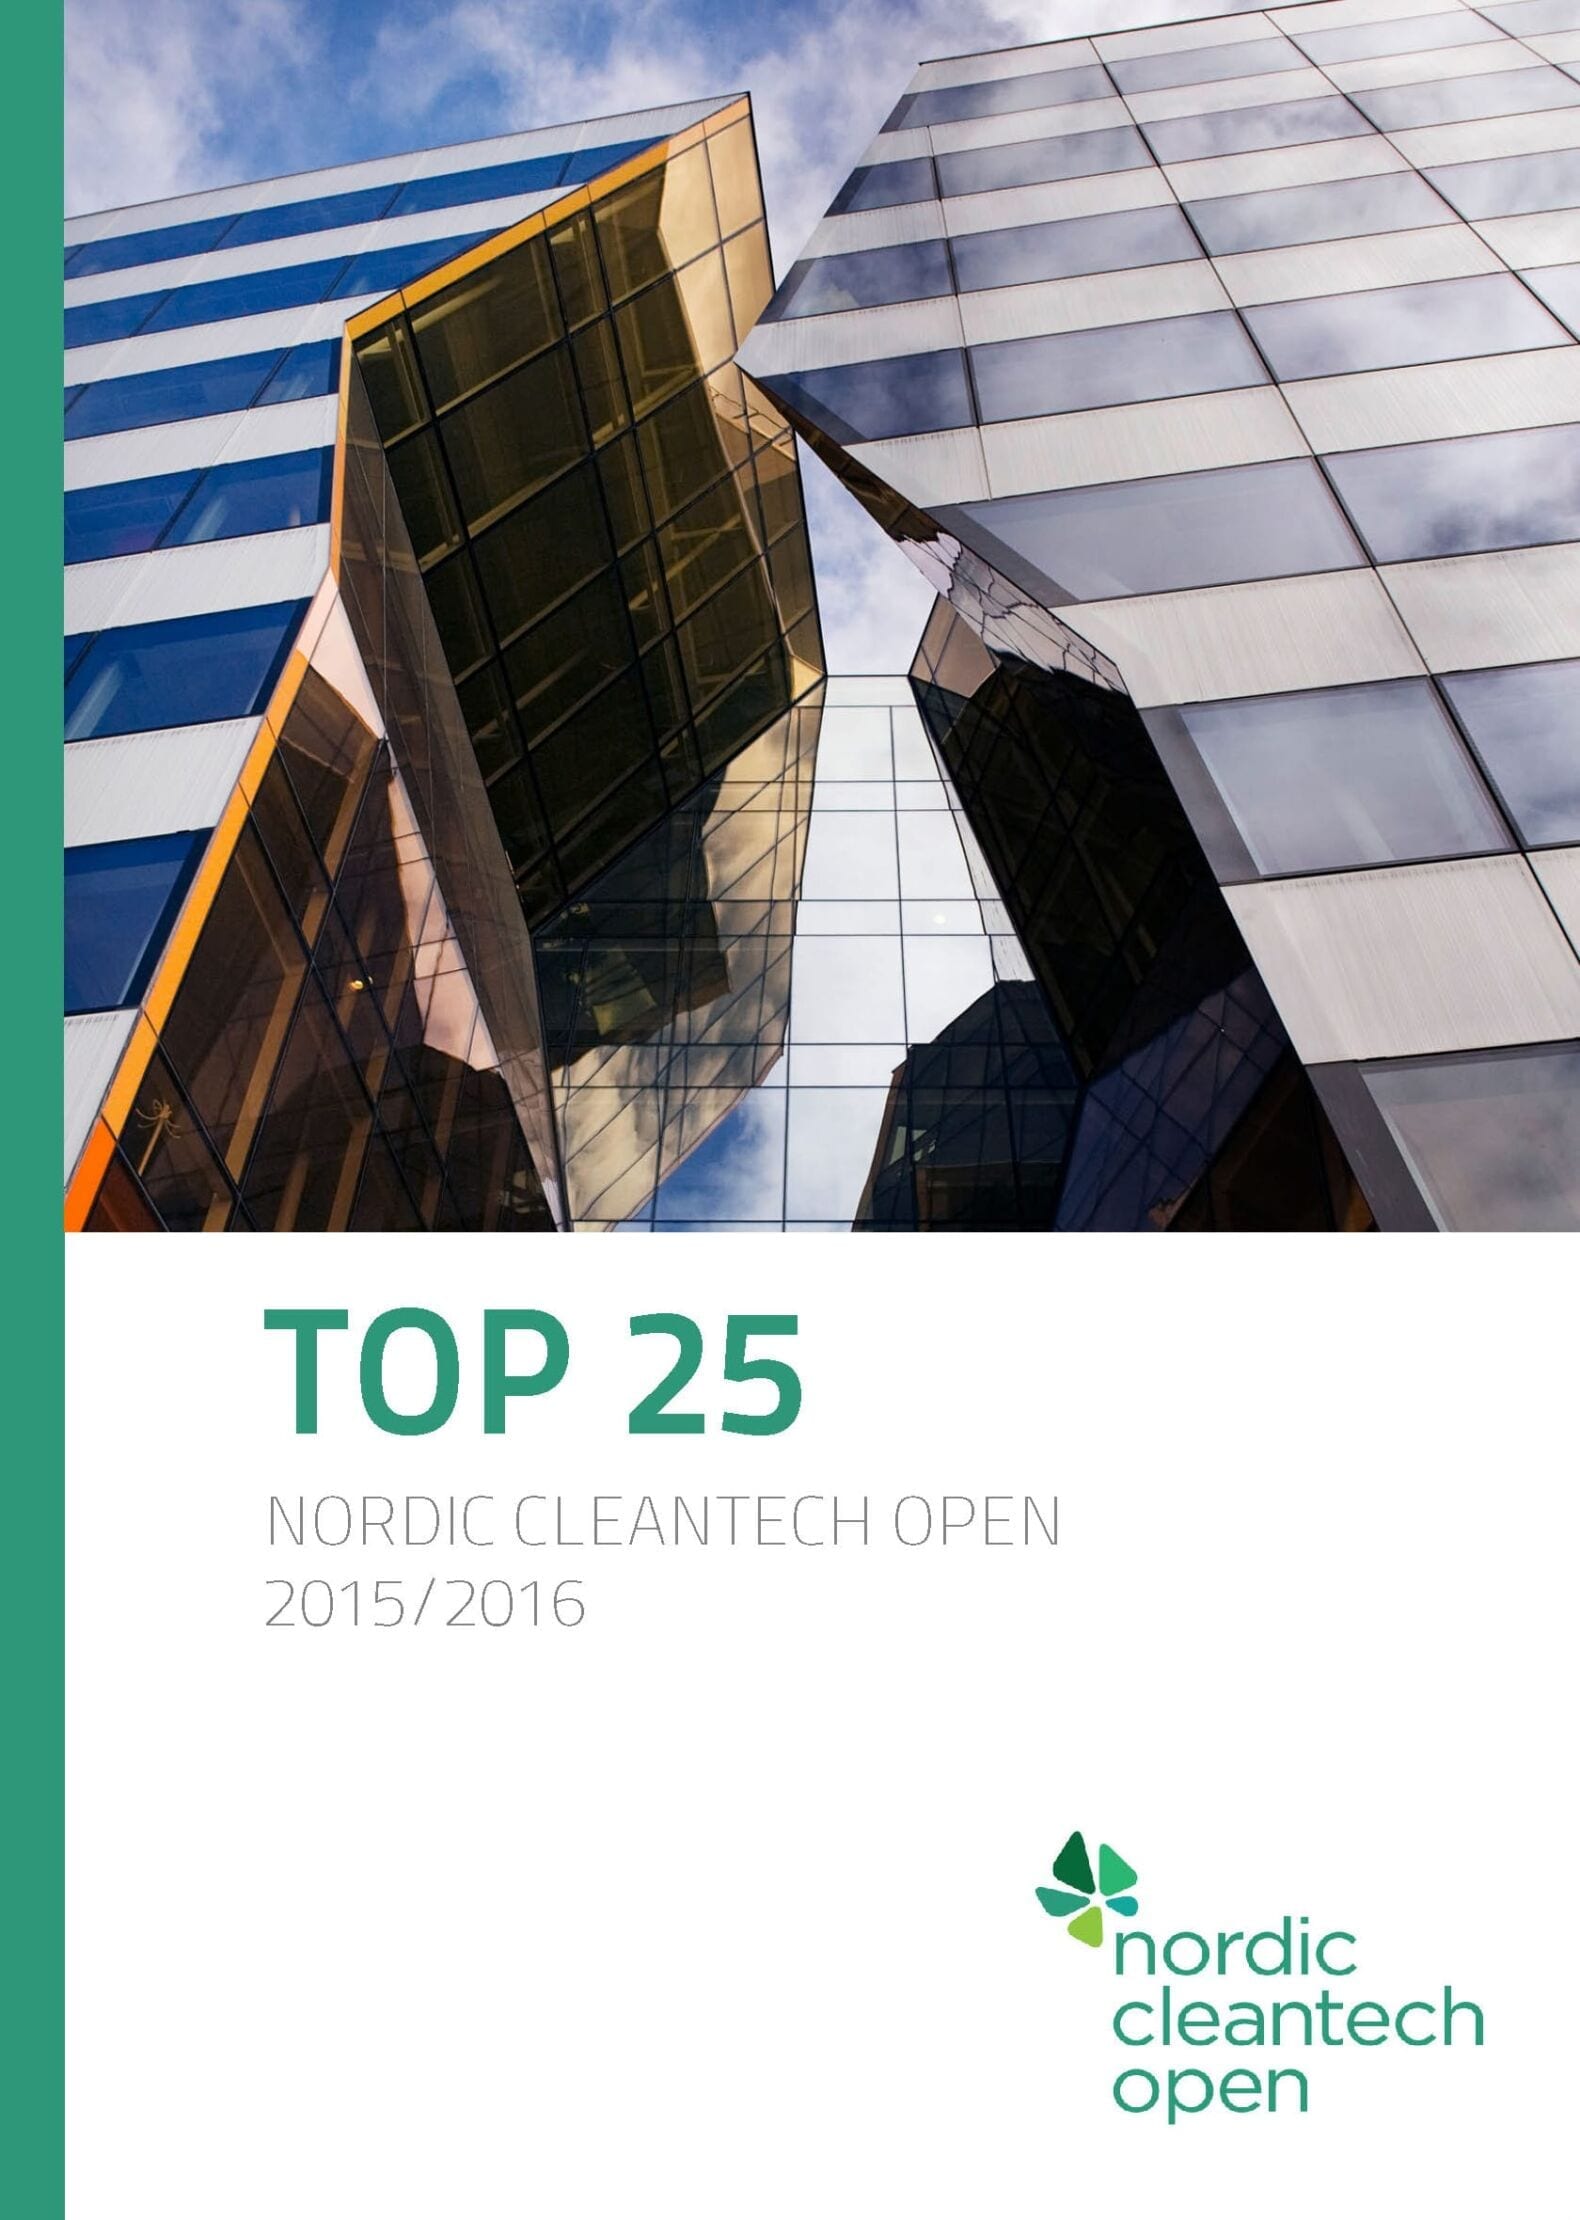 Top 25 Reports - Cycle 2015/16